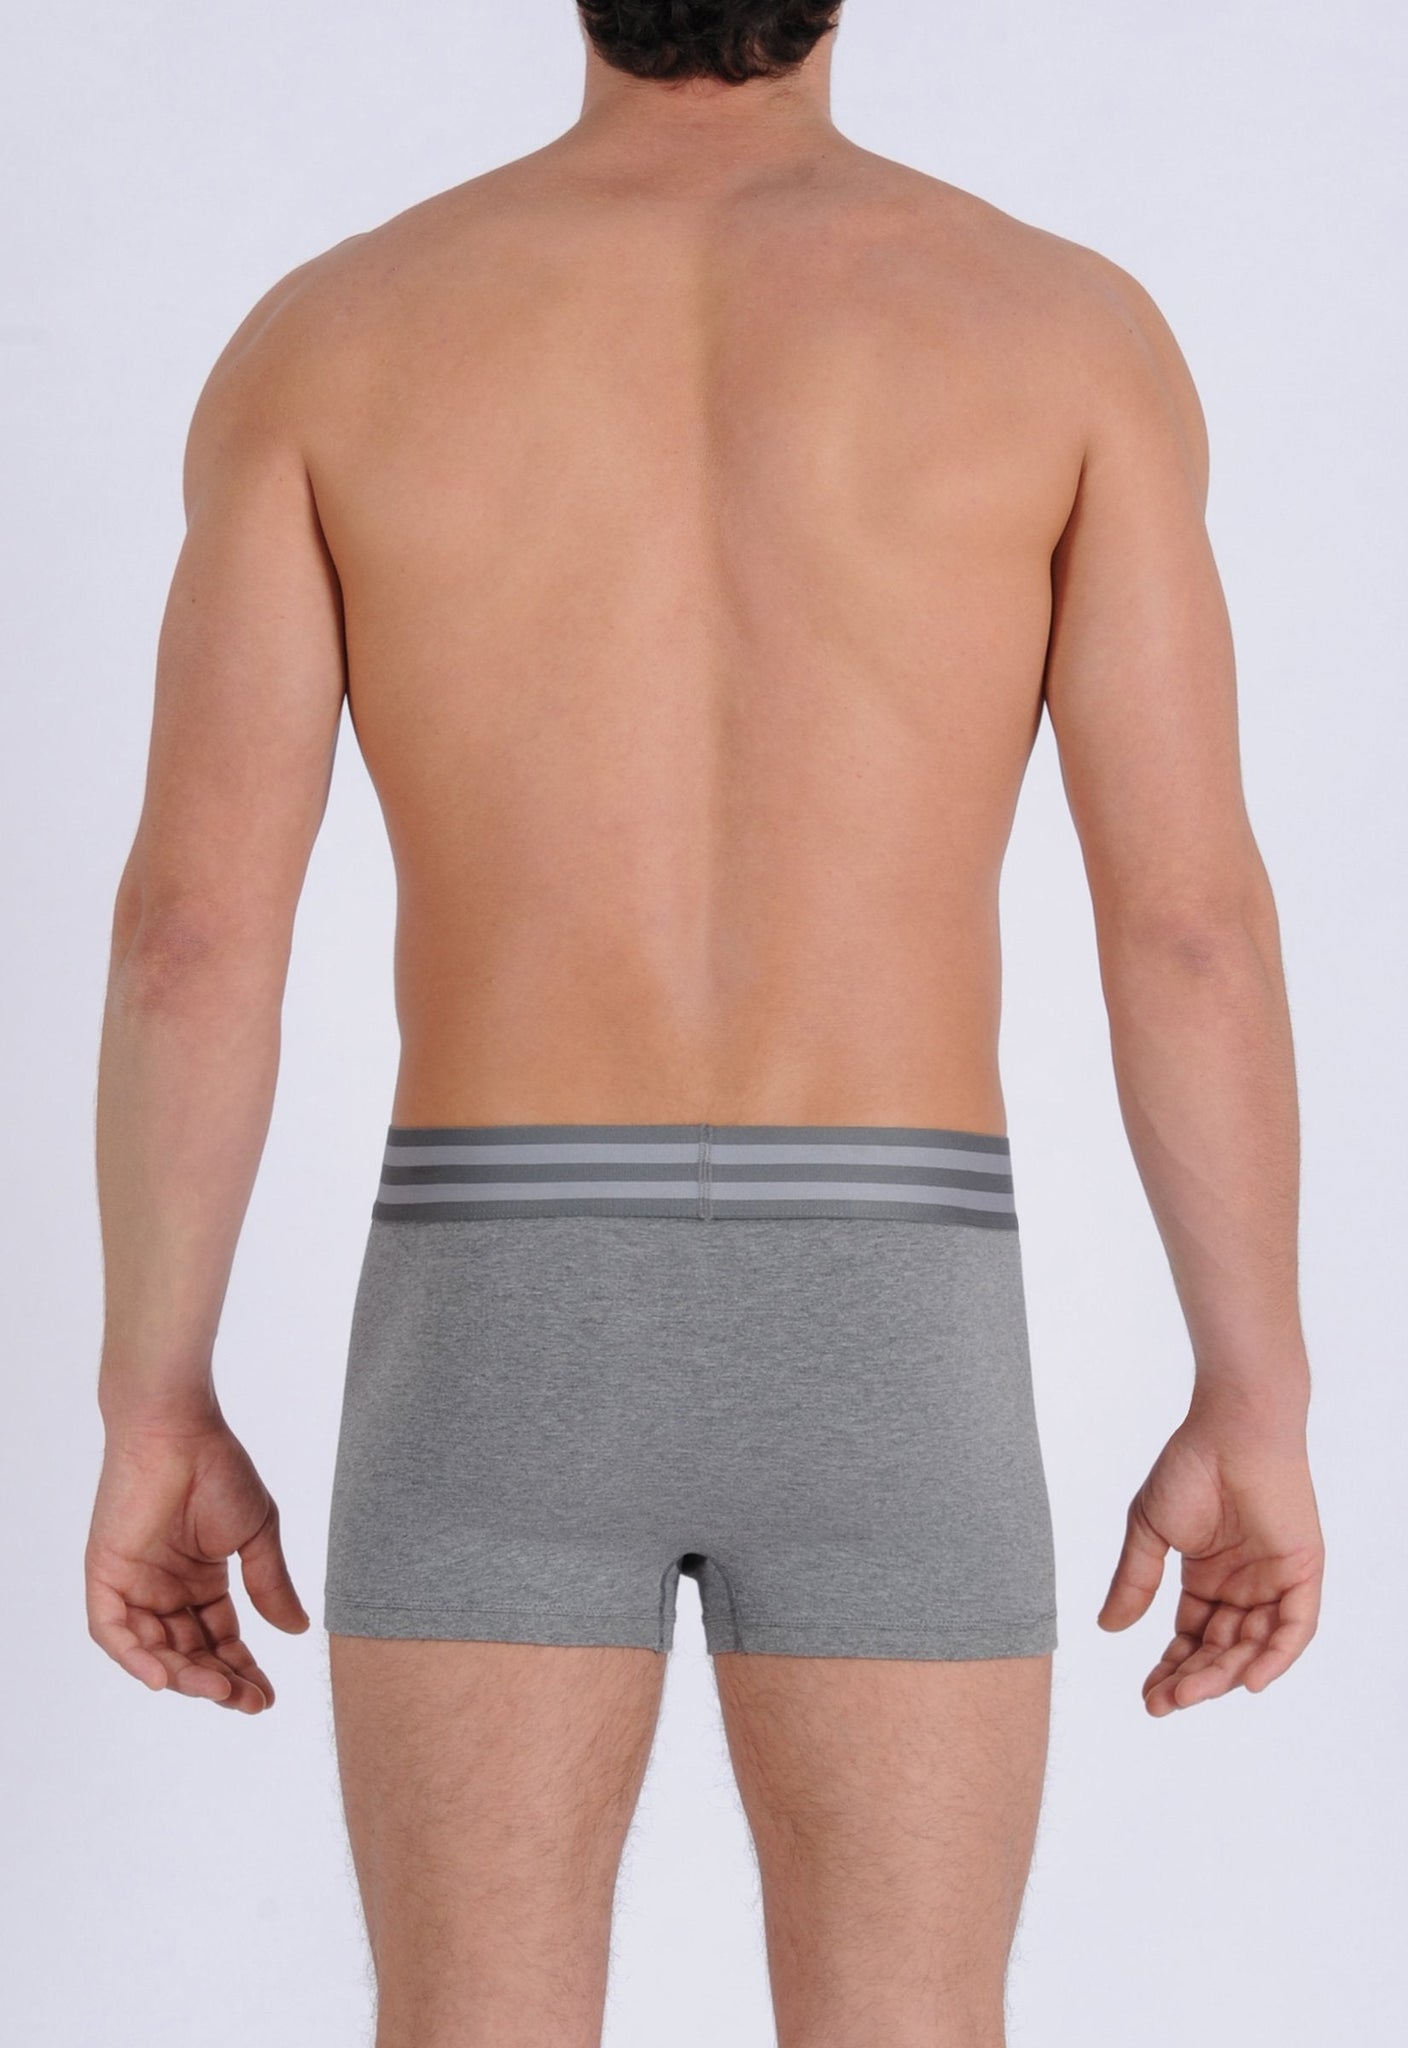 Ginch Gonch Signature Series - Trunk, short boxer brief - Grey men's underwear thick printed waistband back